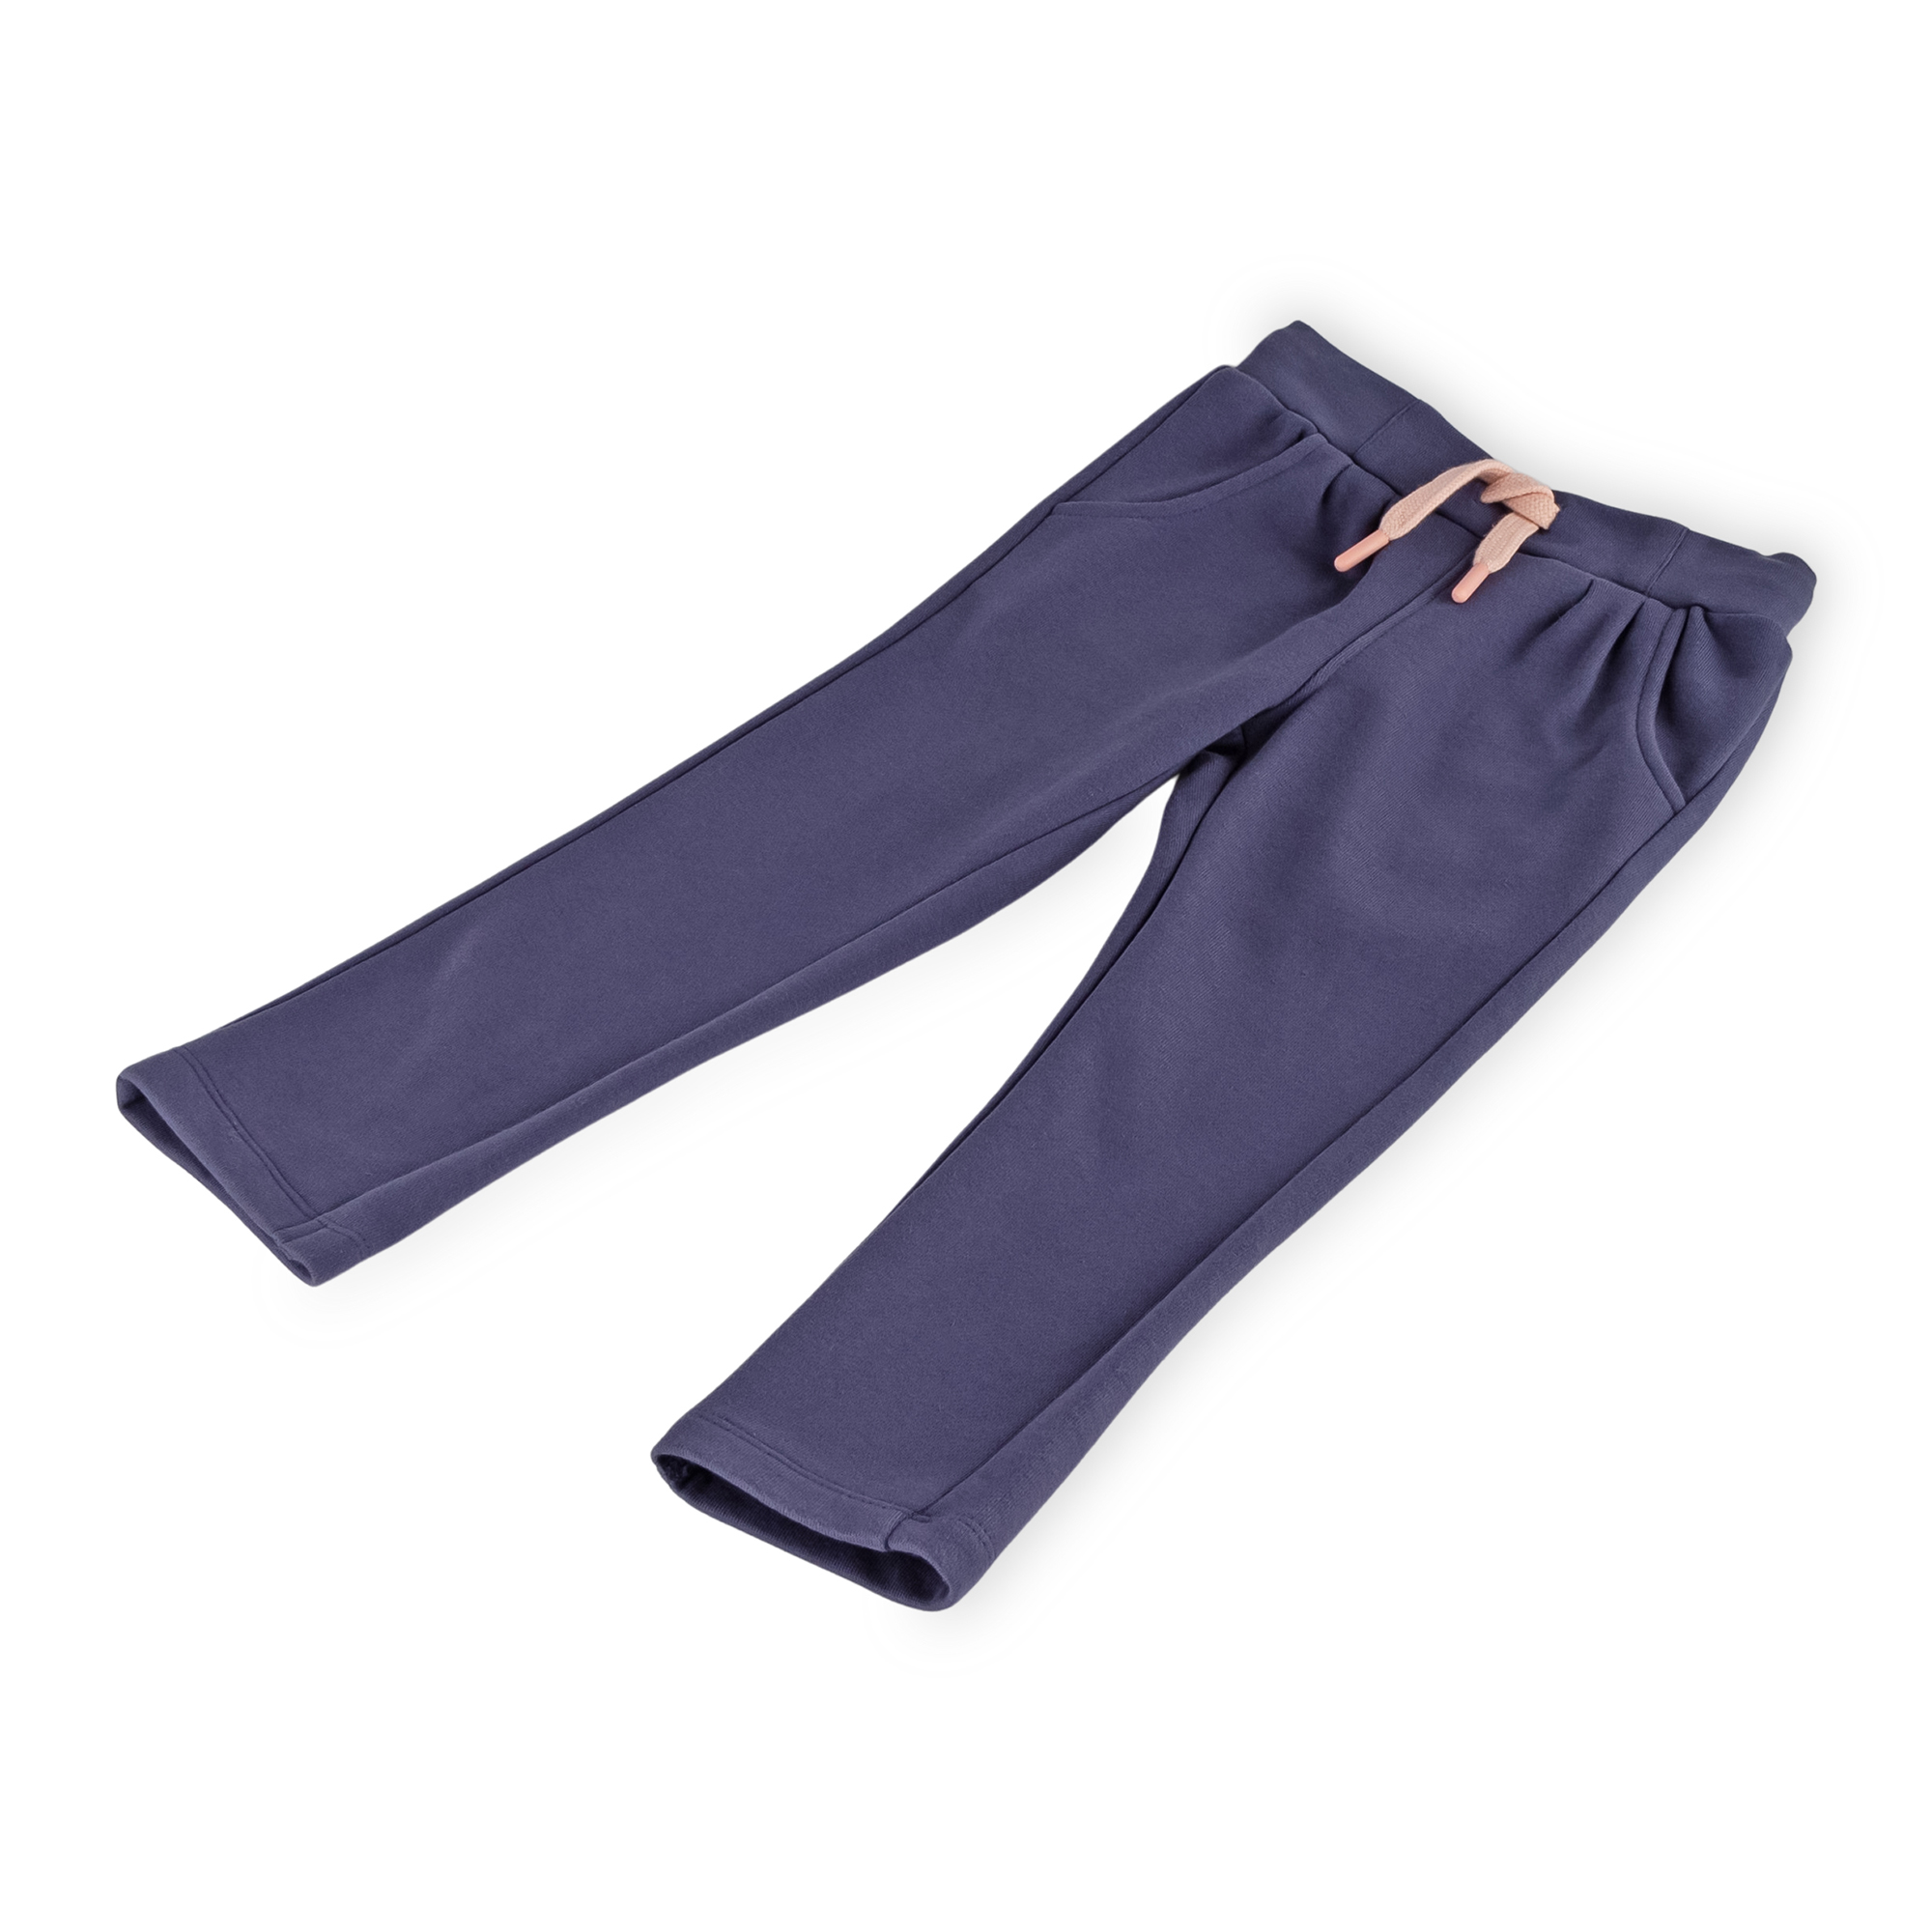 Children's navy sweat pants, butterfly on the back